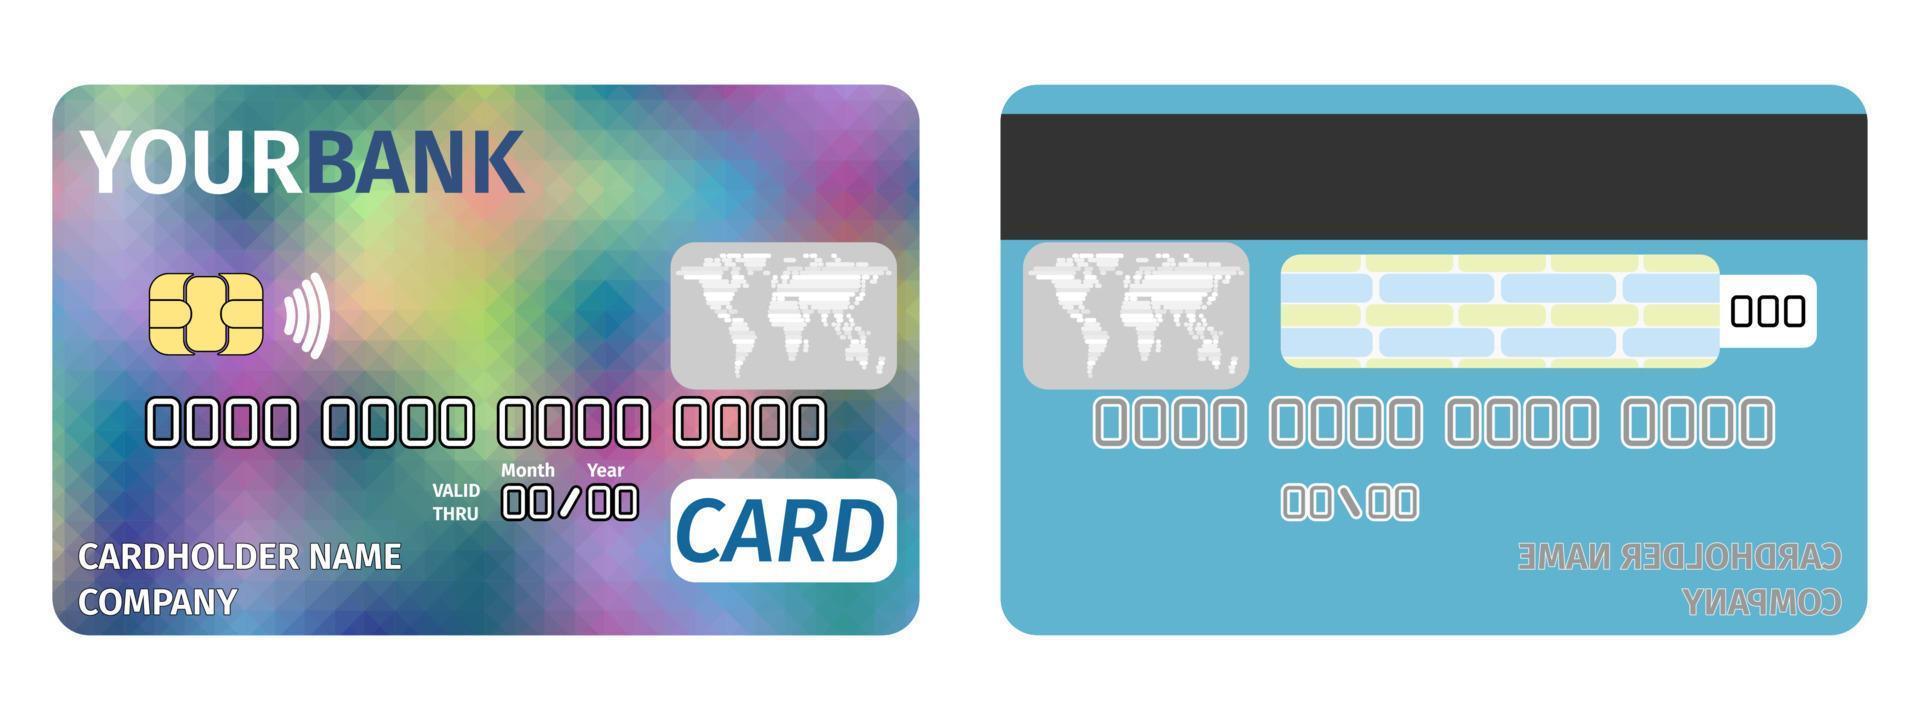 credit card banking bright flat style. print new vector